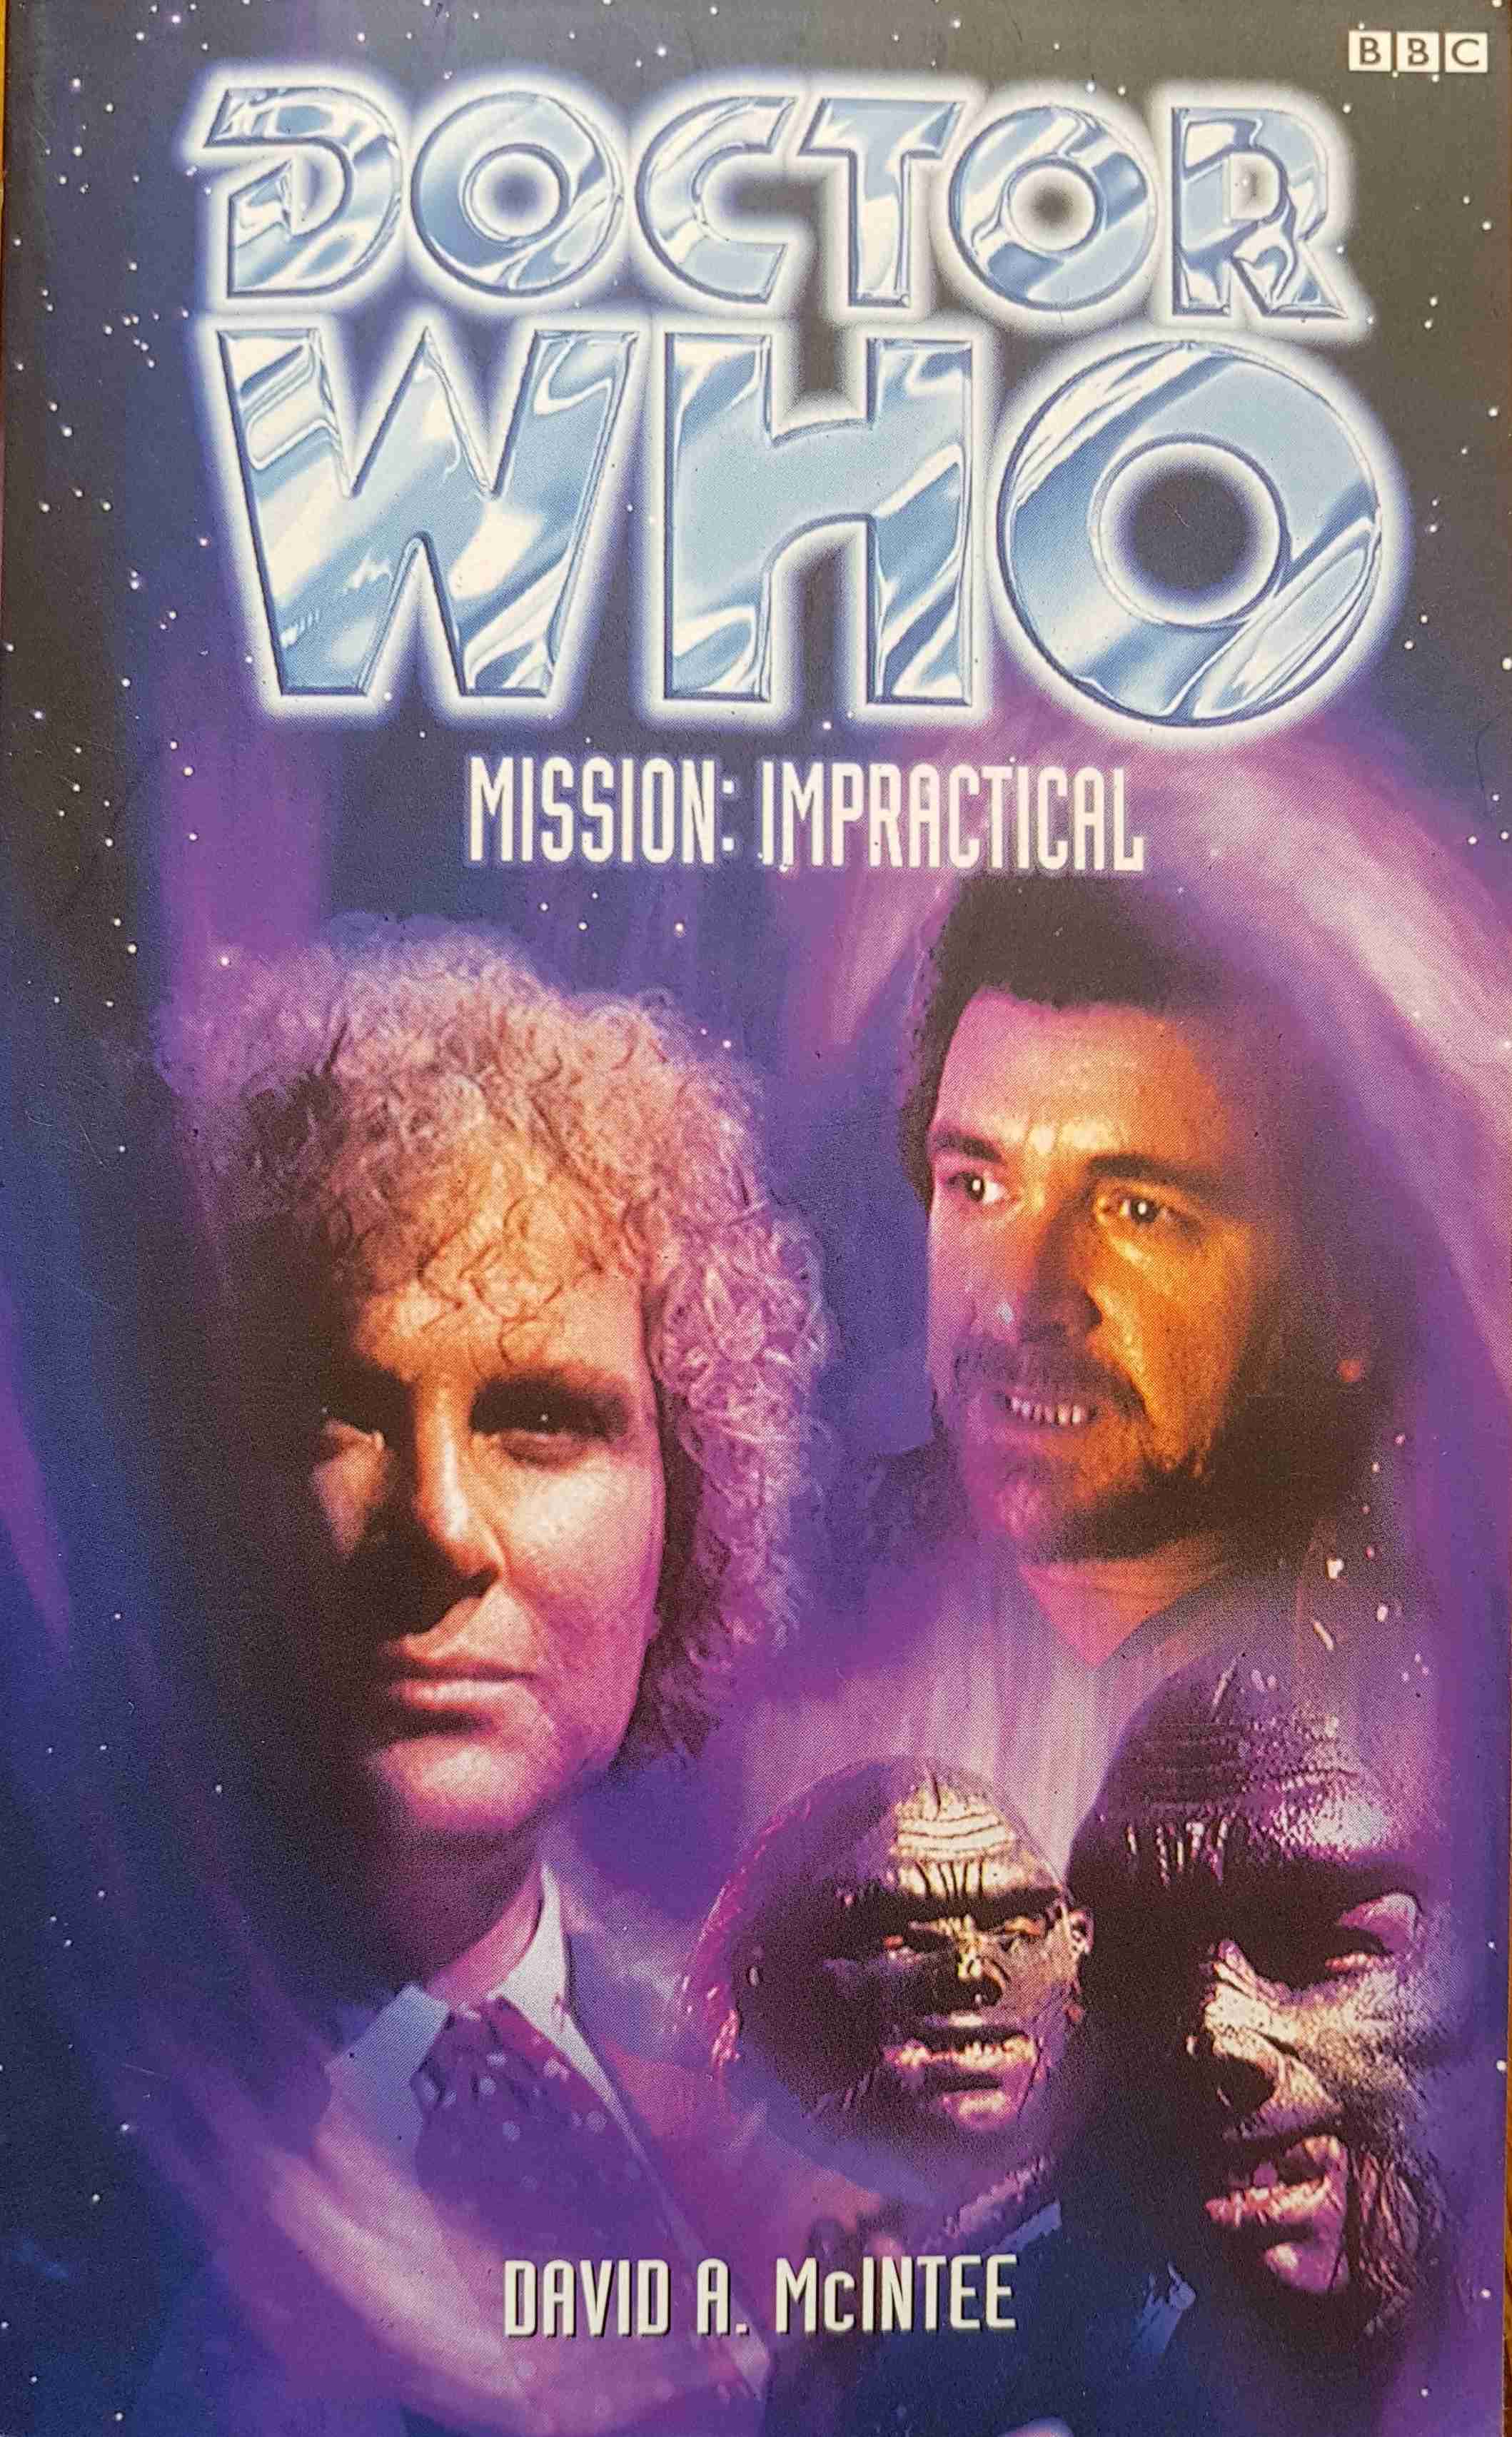 Picture of 0-563-40592-9 Doctor Who - Mission: Impractical by artist David A. McIntee from the BBC books - Records and Tapes library